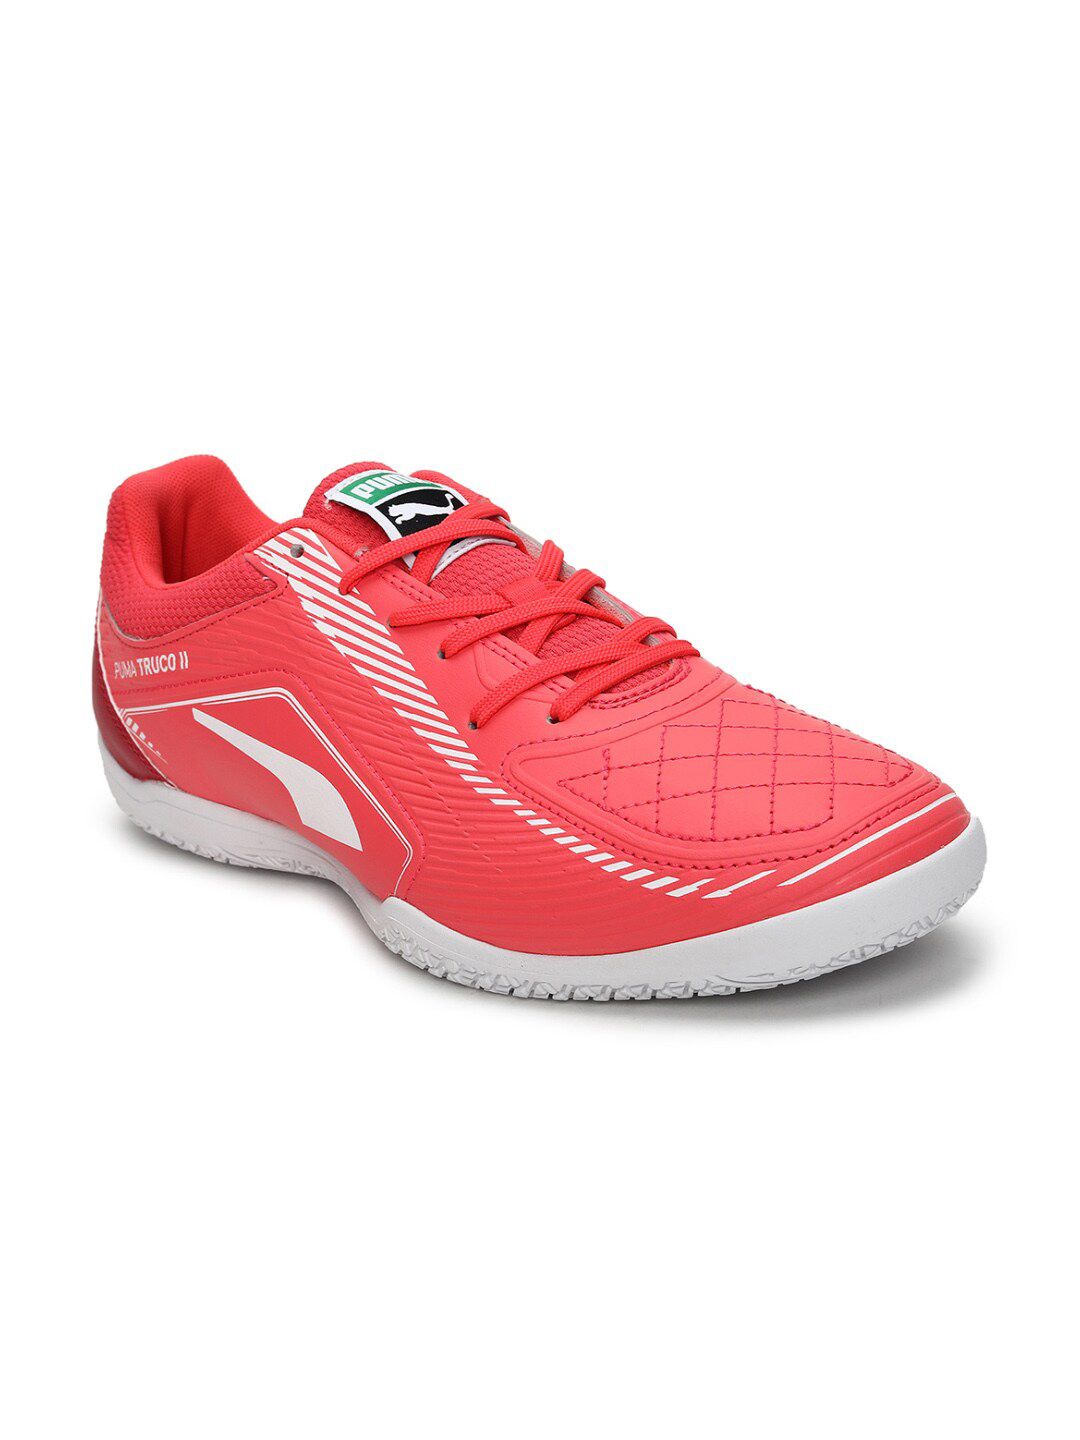 Puma Unisex Red Football Non-Marking TRUCO II Shoes Price in India